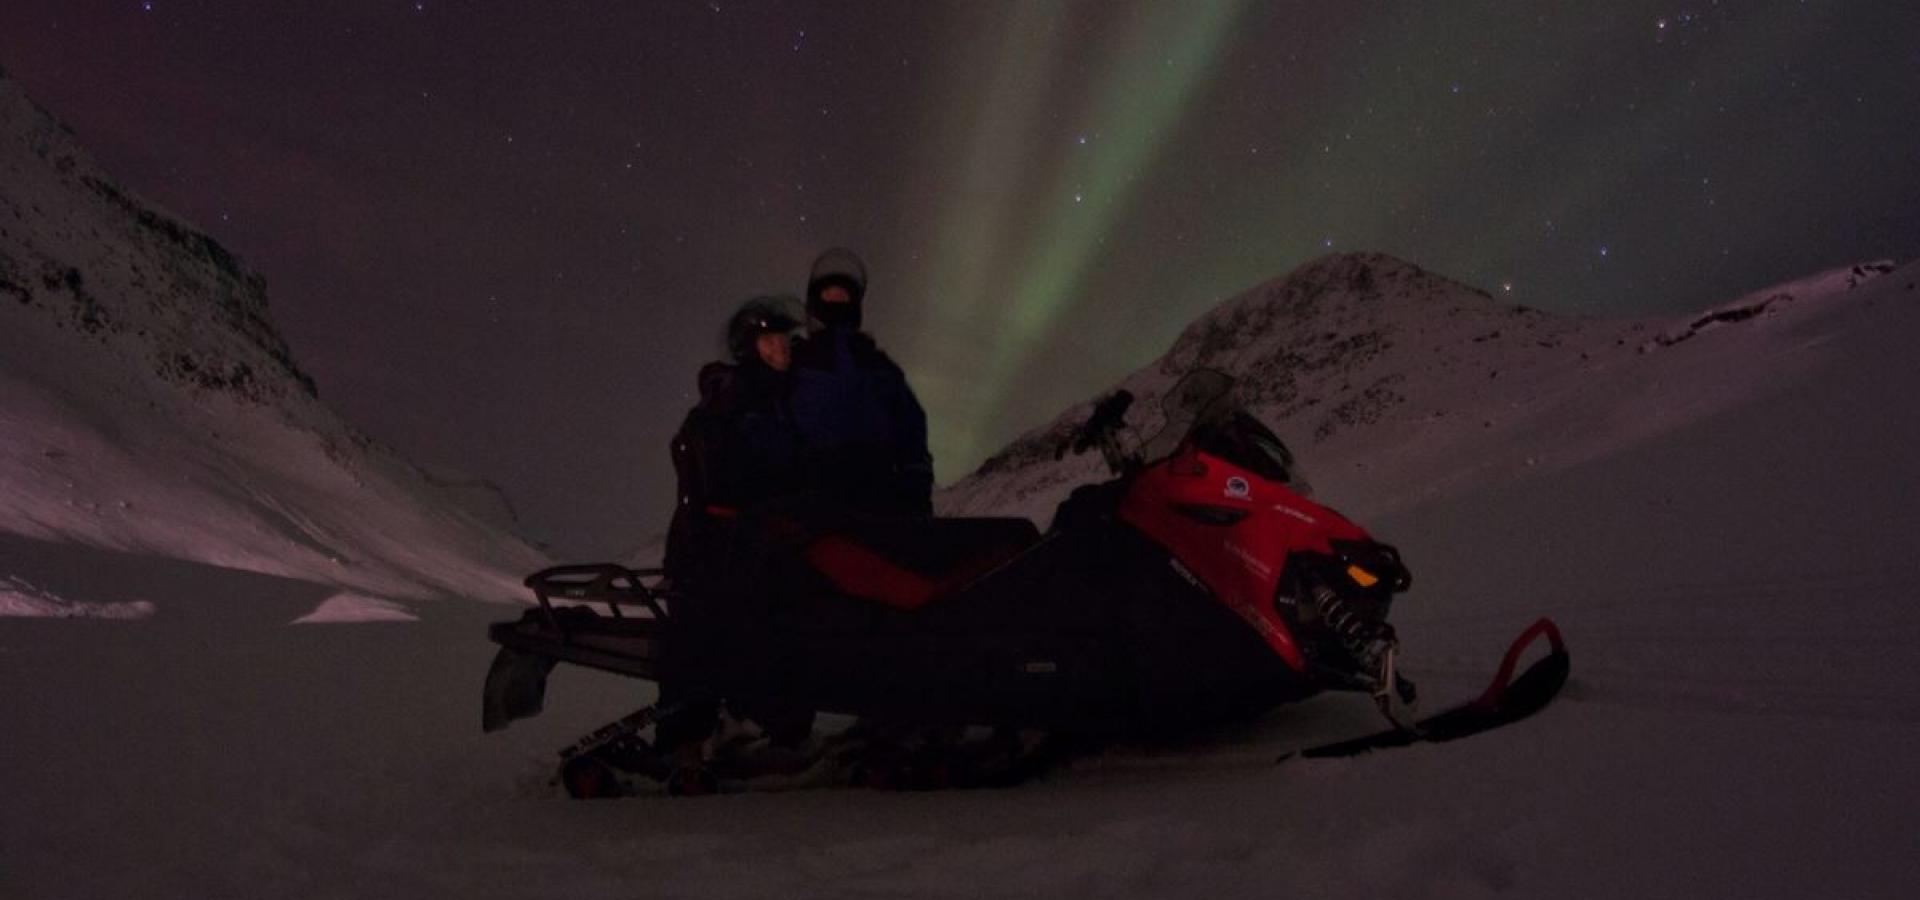 Snowmobile excursion into the wilderness - evening tour with North Experience